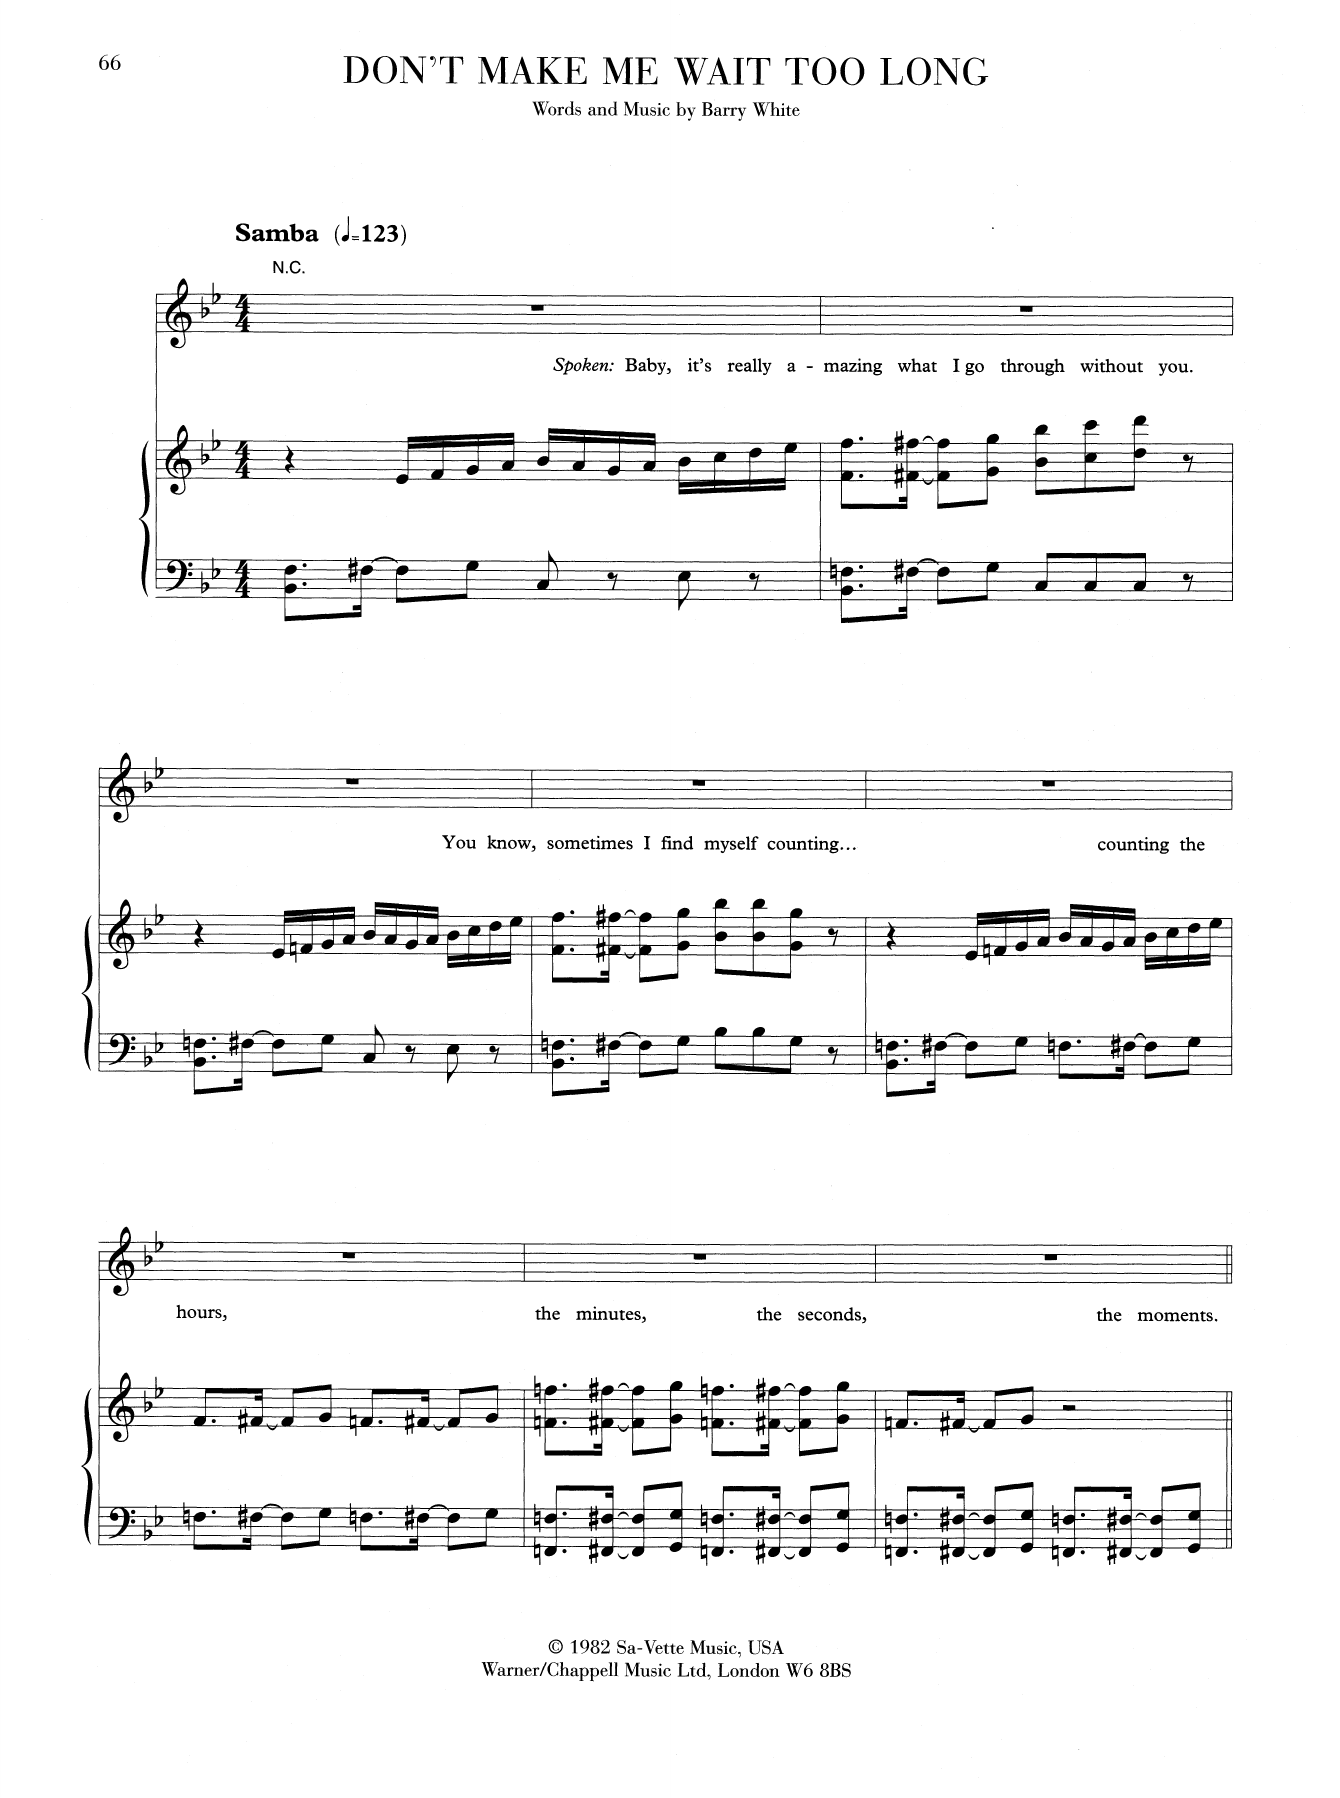 Download Barry White Don't Make Me Wait Too Long Sheet Music